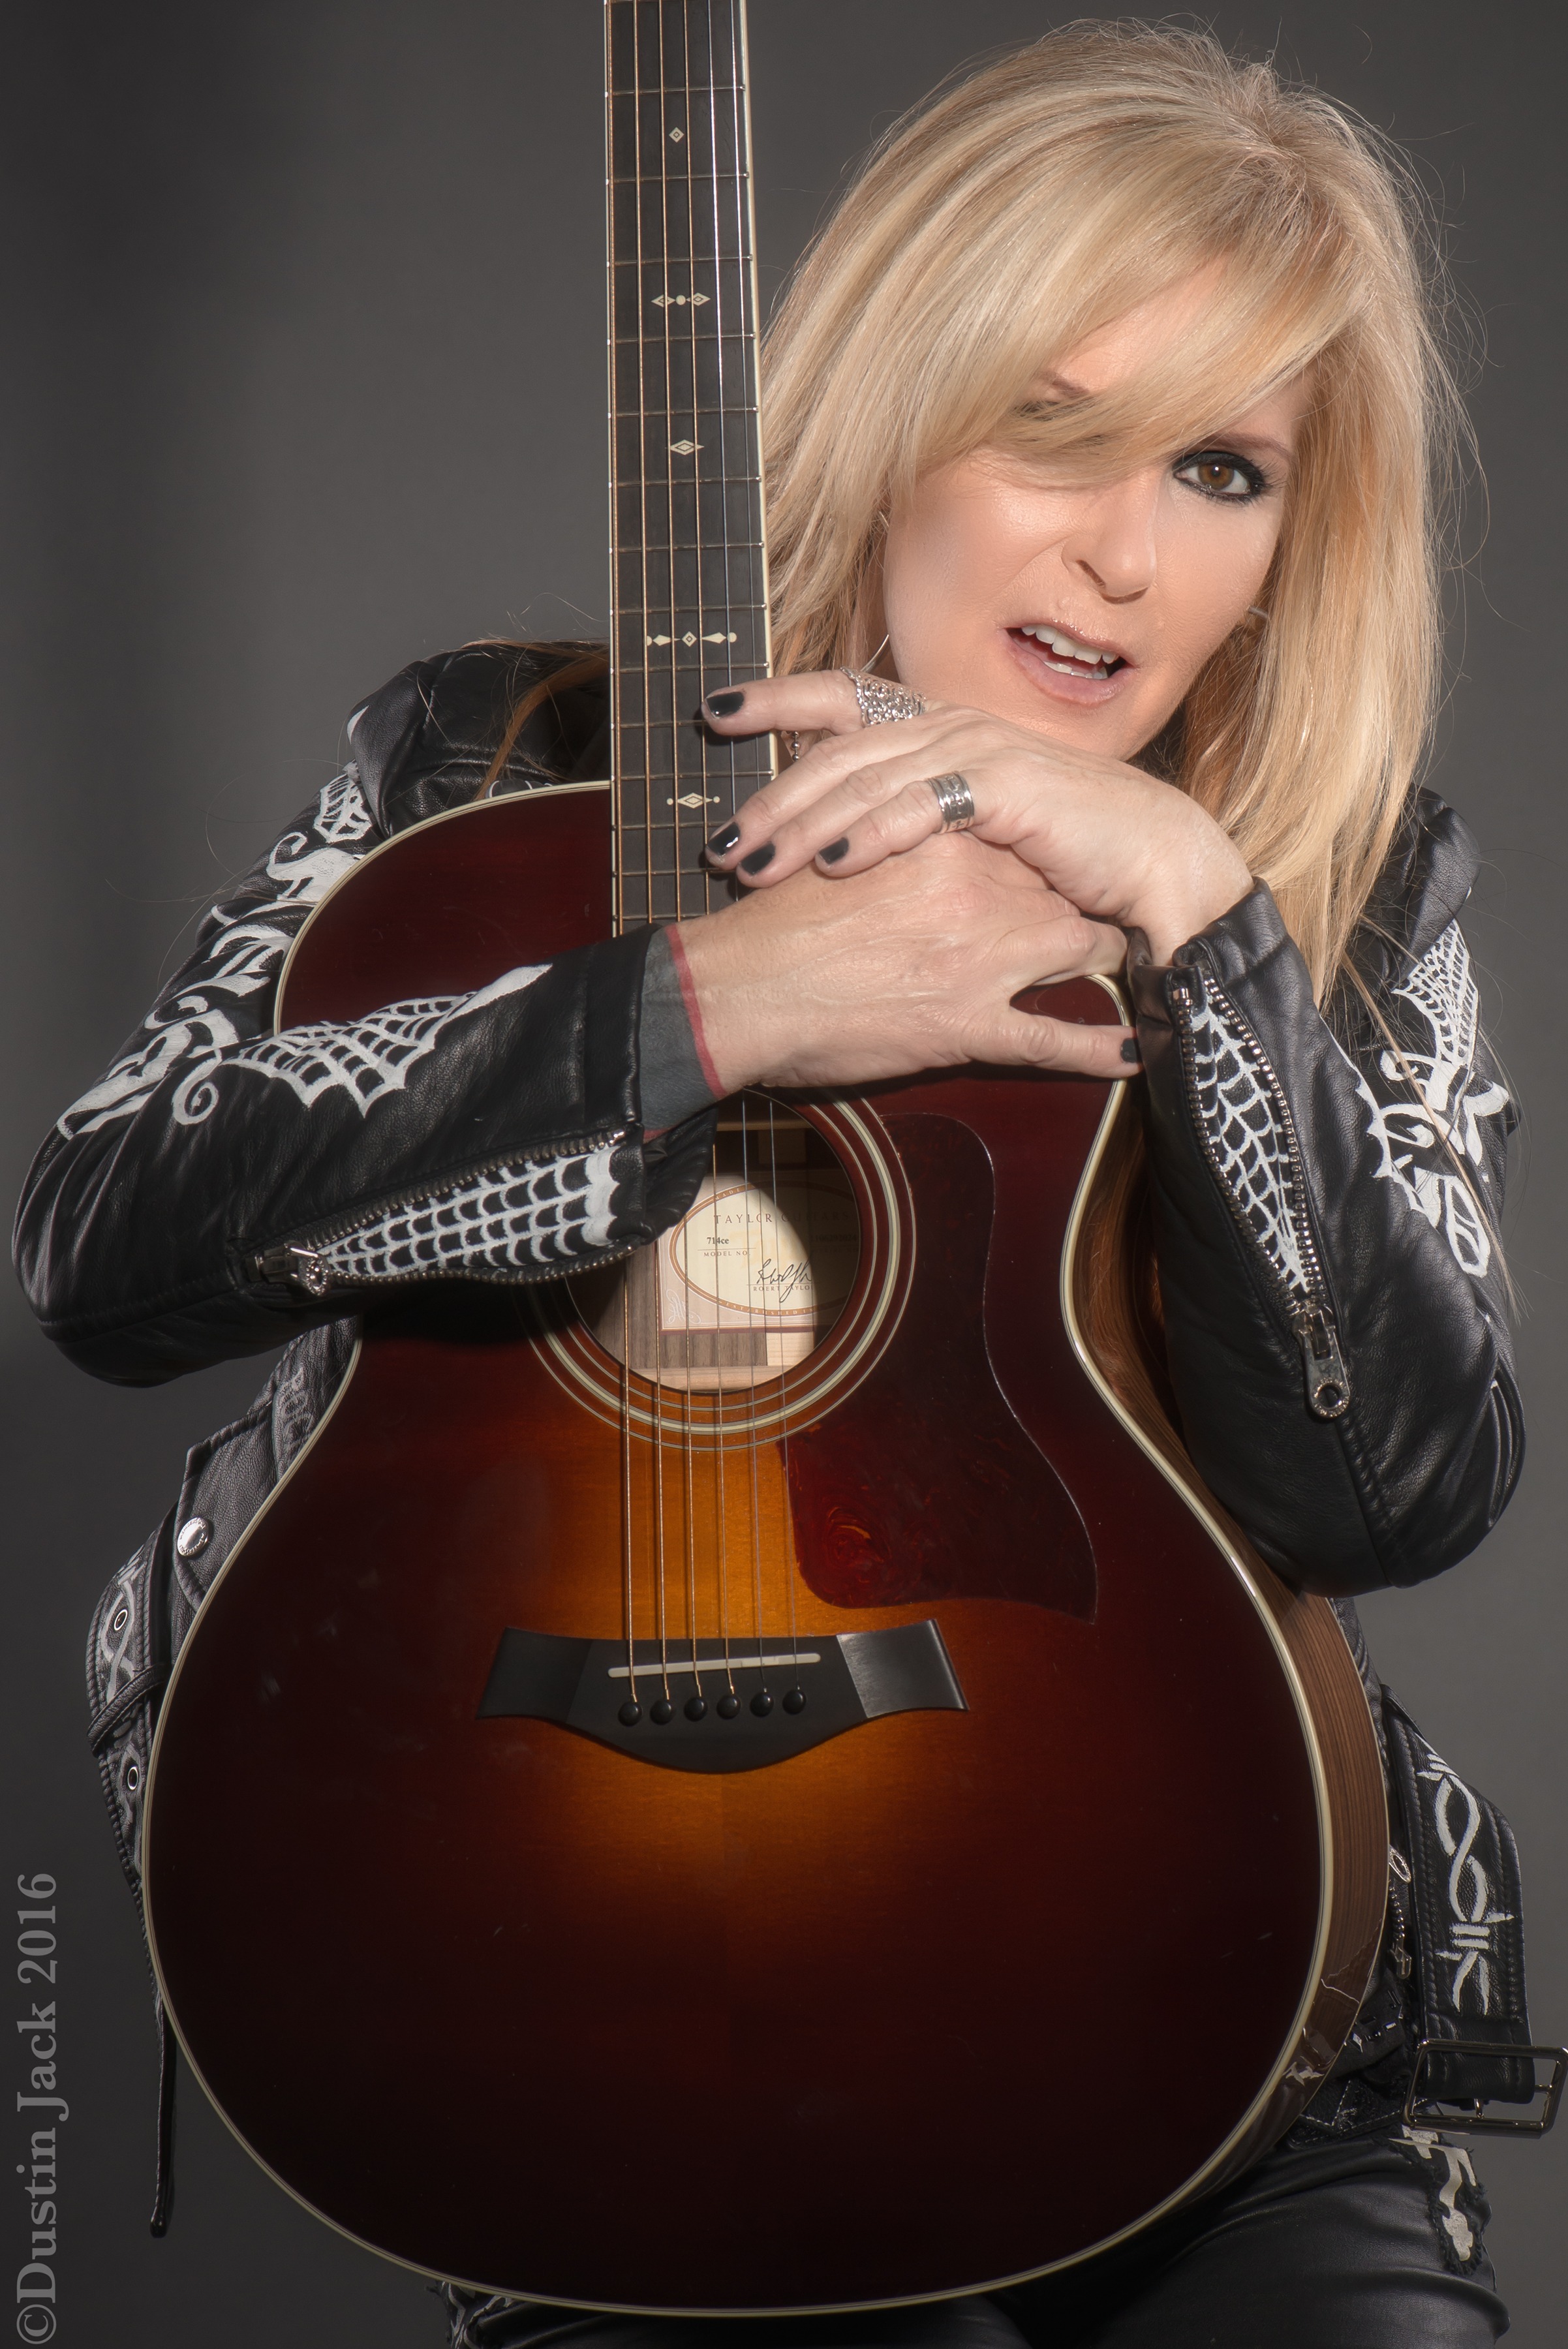 2016 Is The Year of LITA FORD